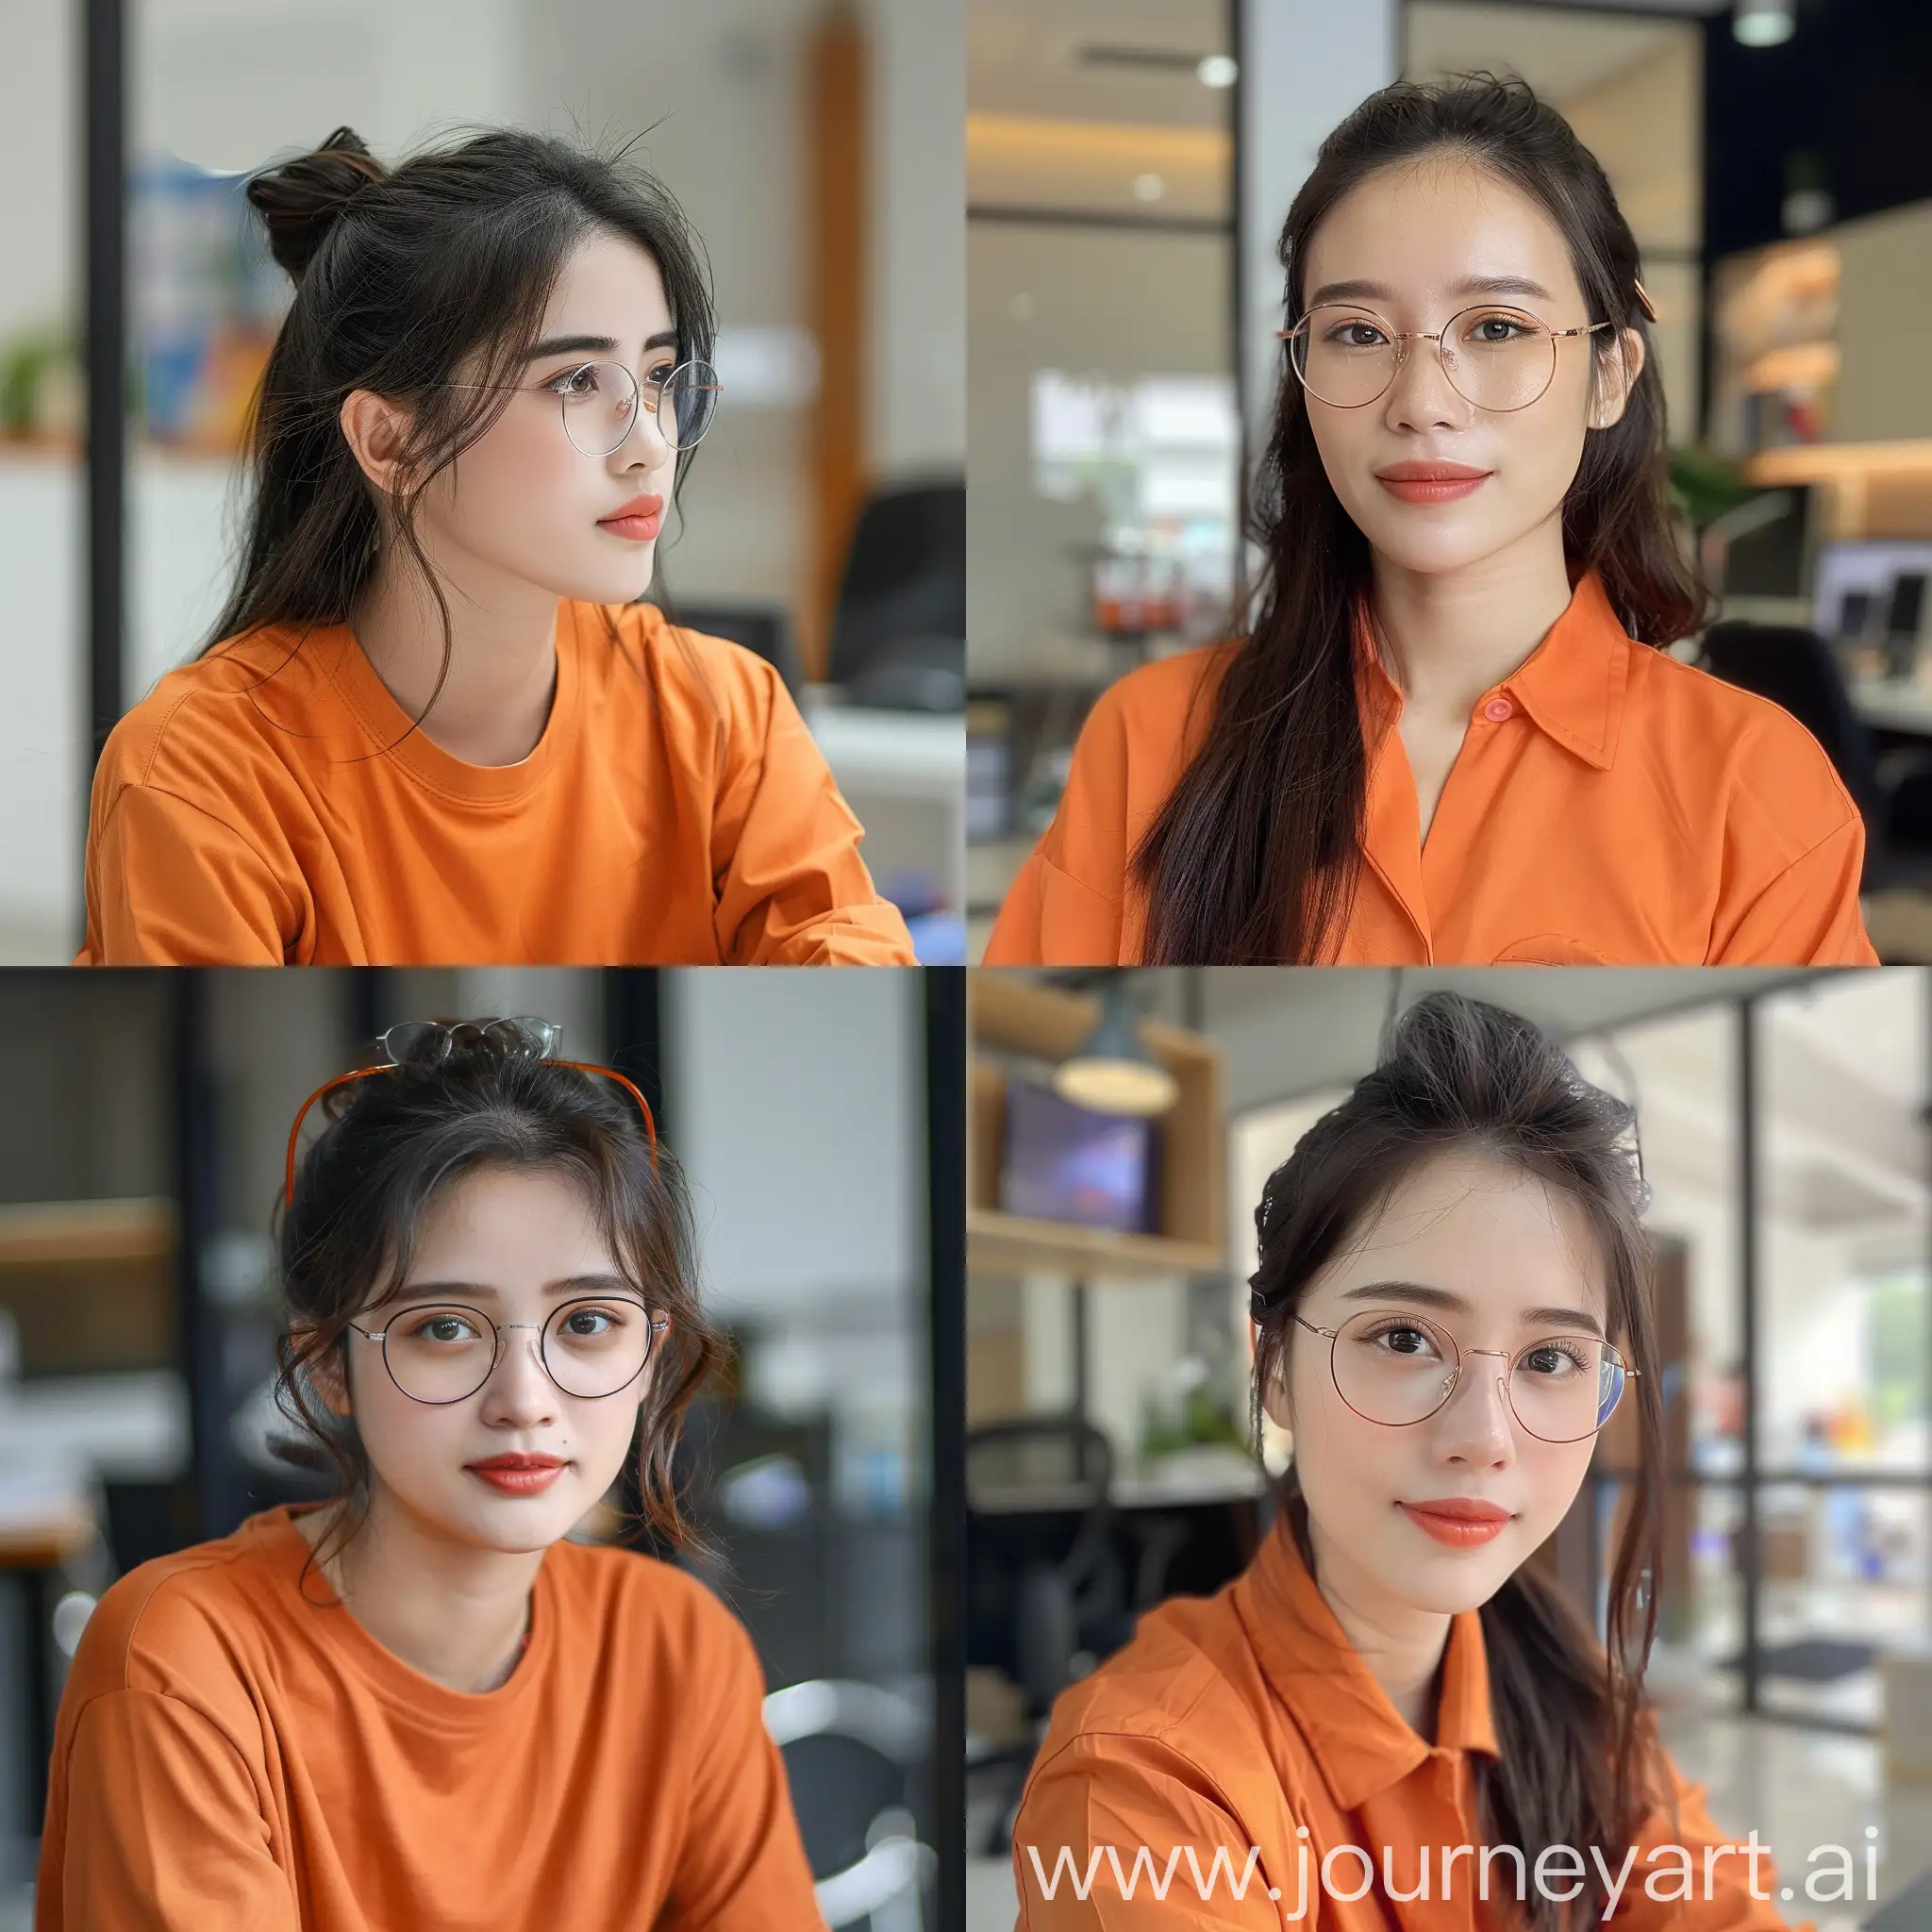 /imagine Vietnamese woman , working on office, hairclip style , little eyes with glasse ,shirt orange color, 30 year old